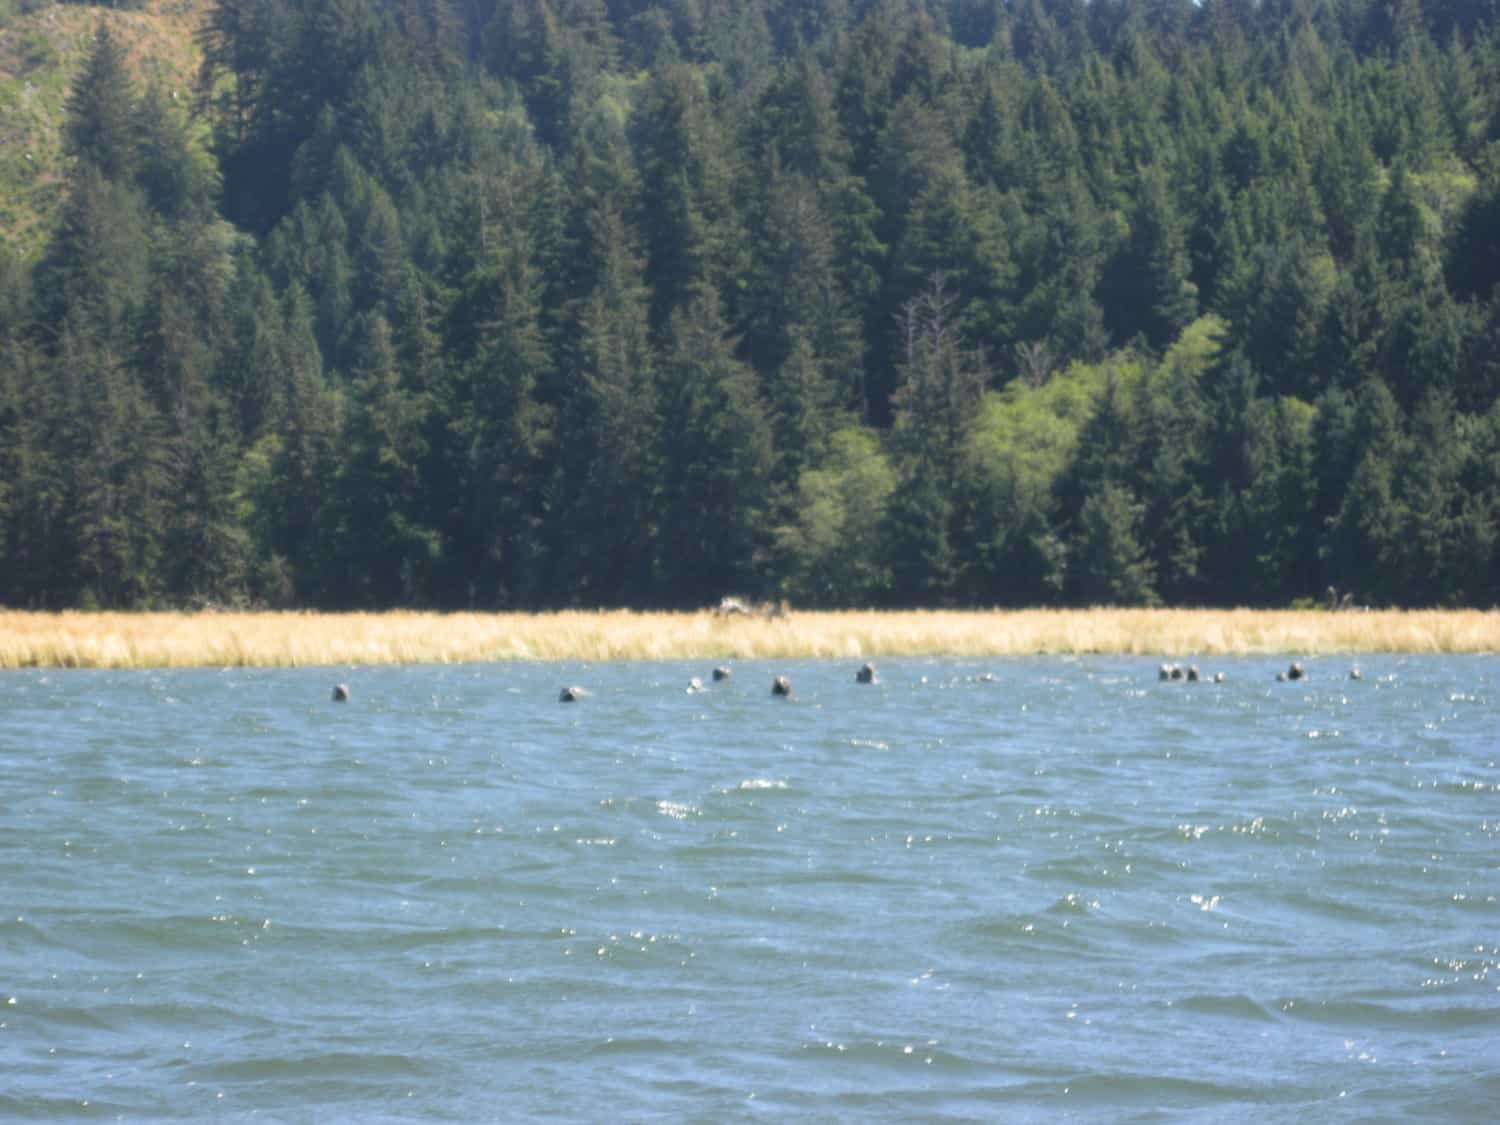 Seals in the Siuslaw River - Florence, OR